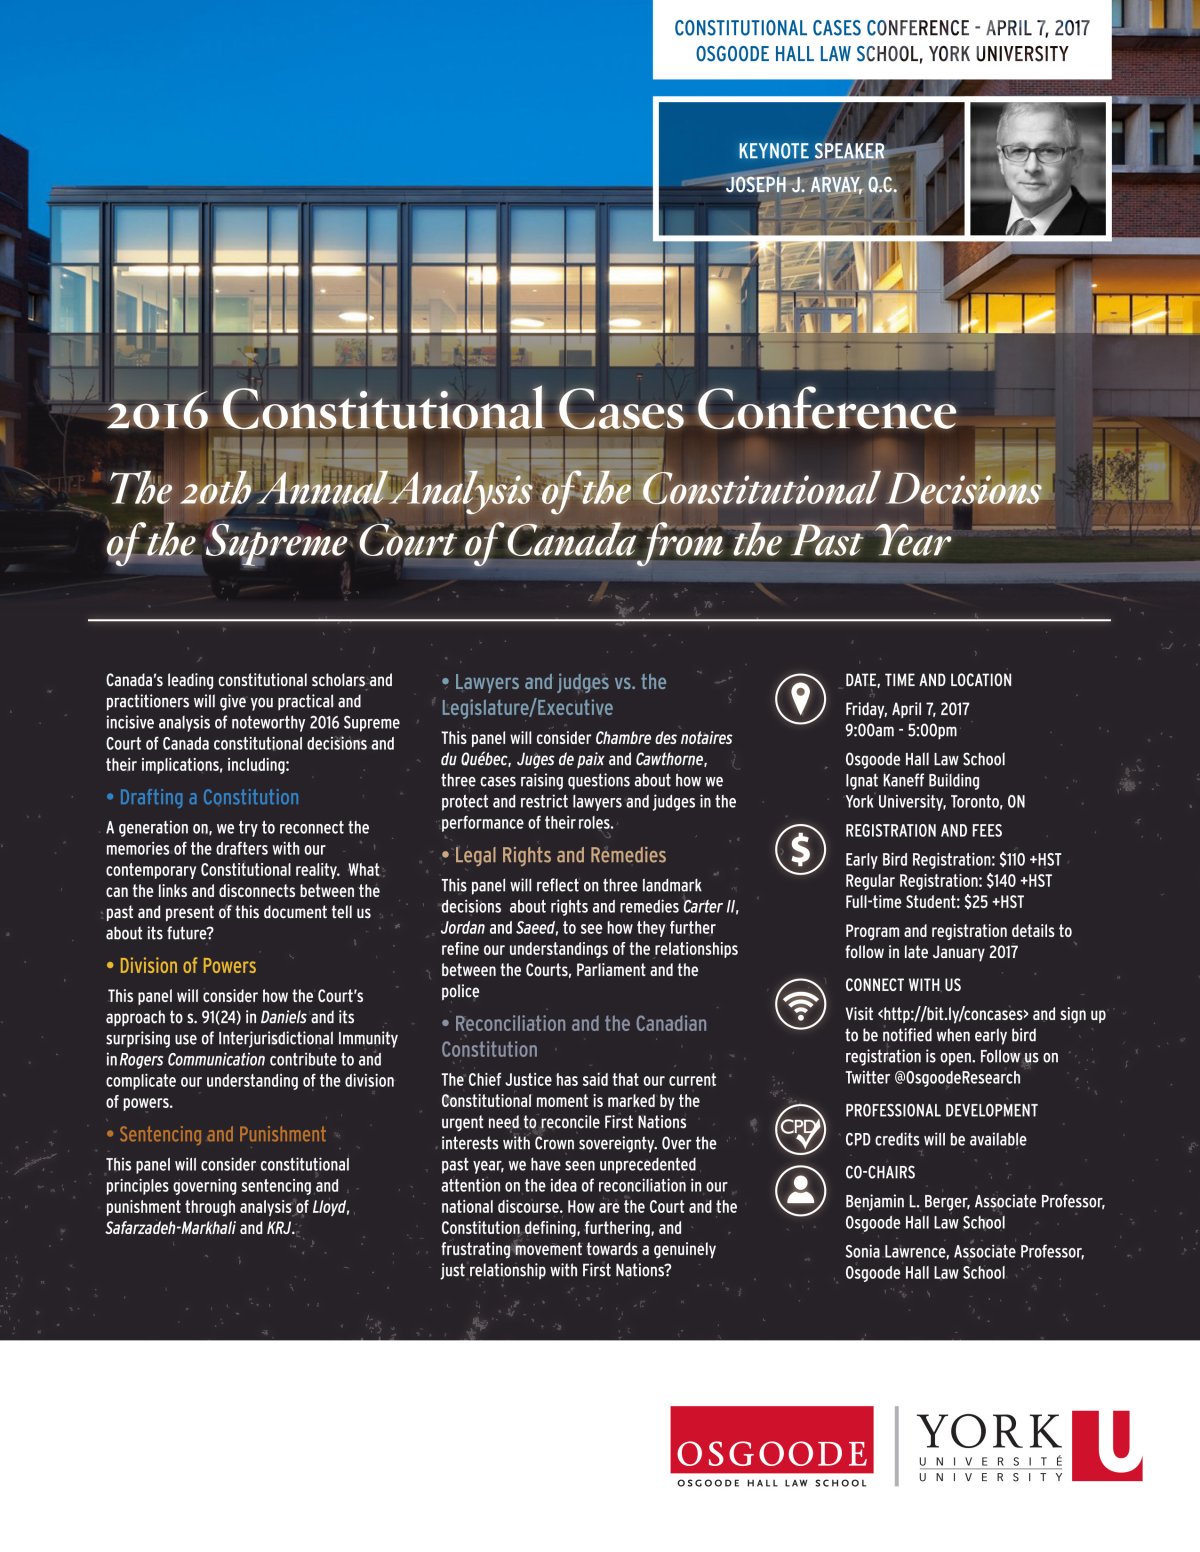 20th Annual Constitutional Cases Conference - image